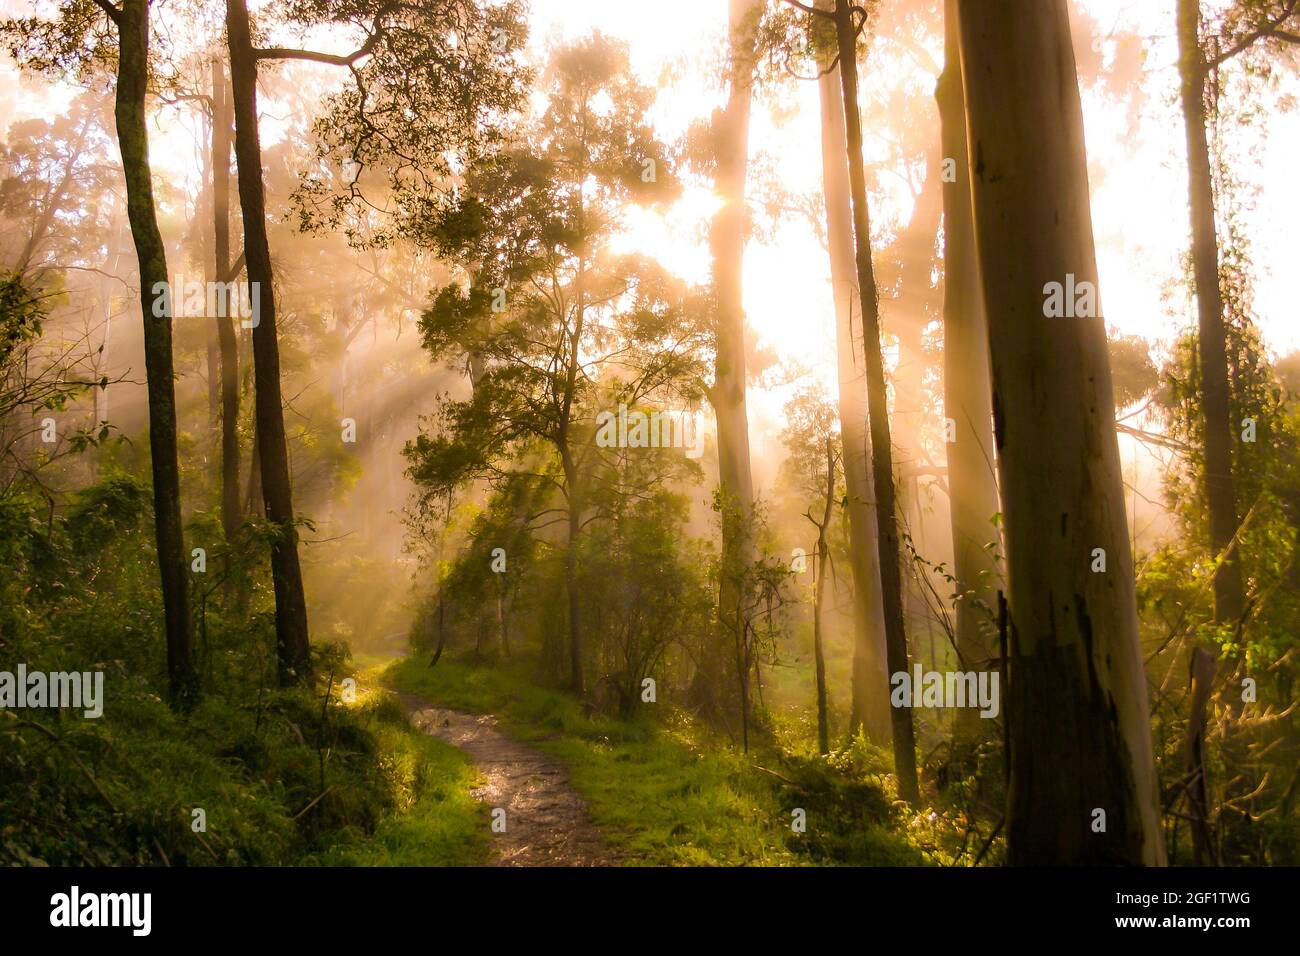 Godrays from the golden sunrise shine through the misty forest trees Stock Photo